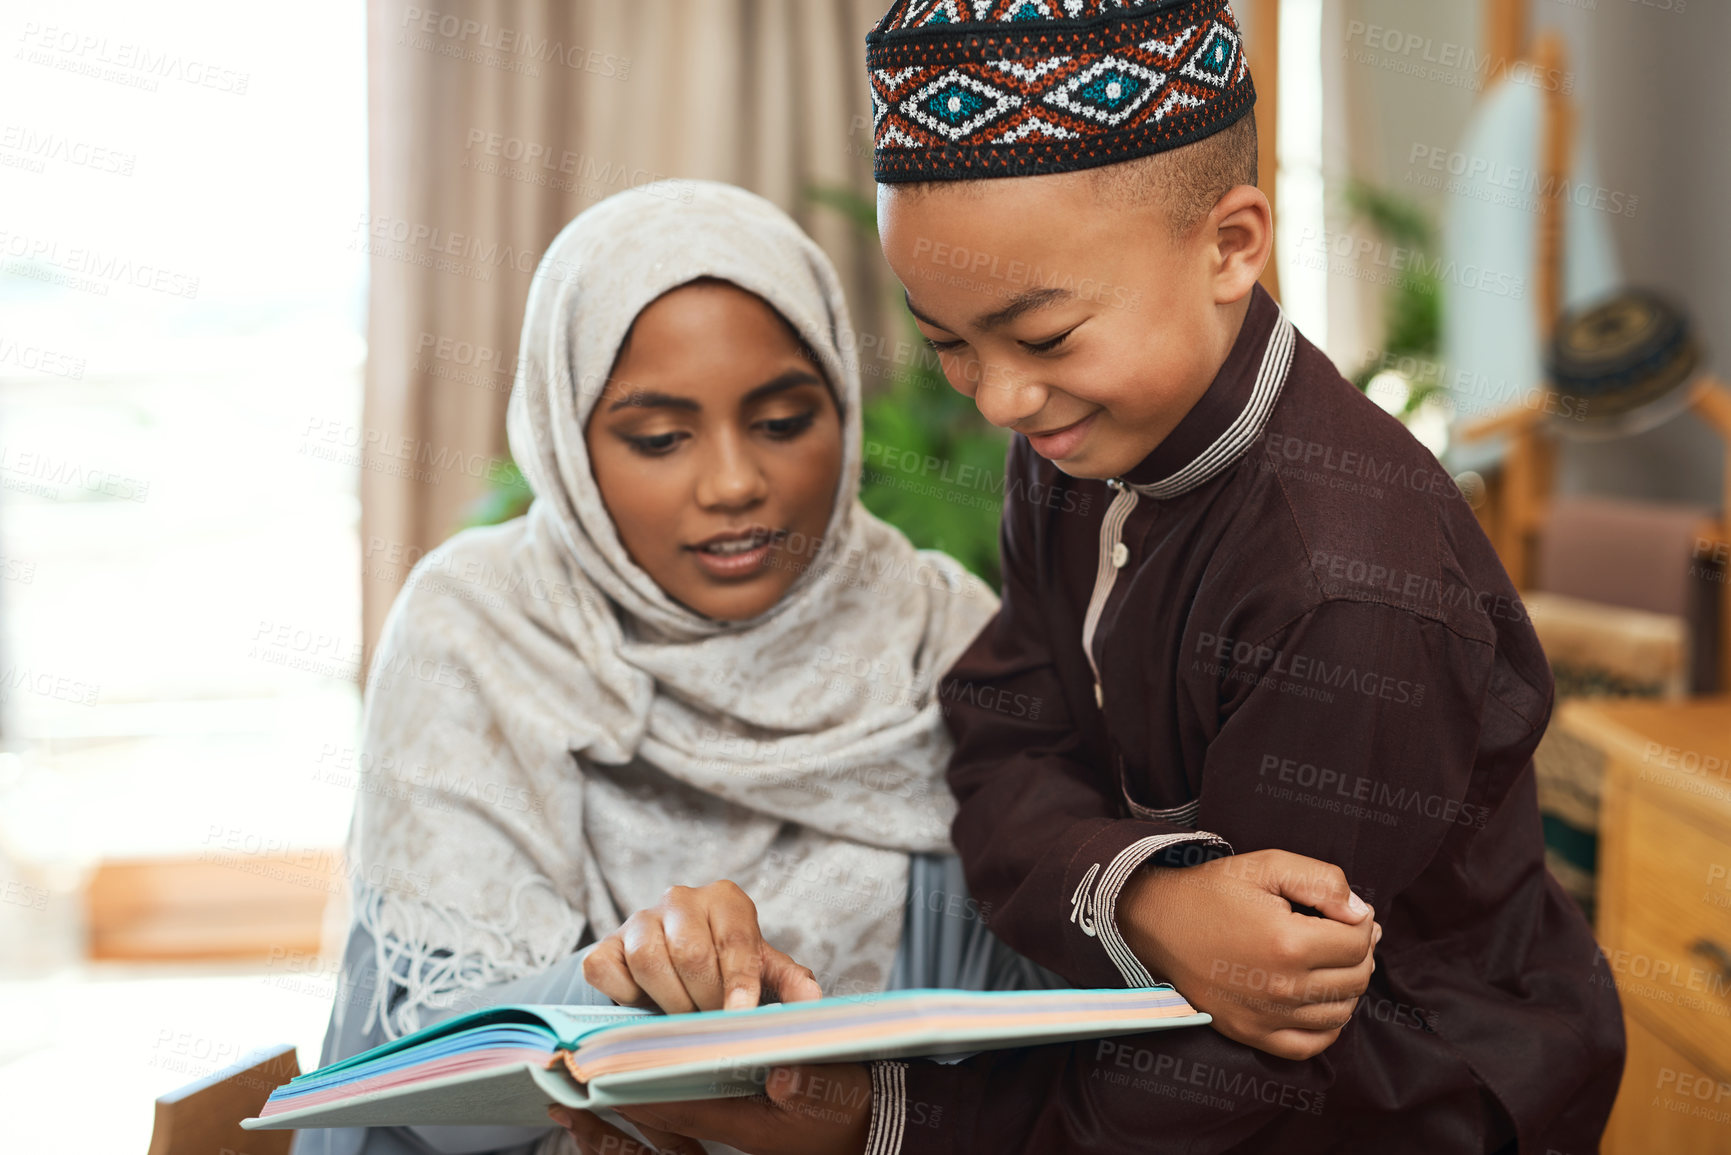 Buy stock photo Shot of a young muslim mother spending time with her son at home